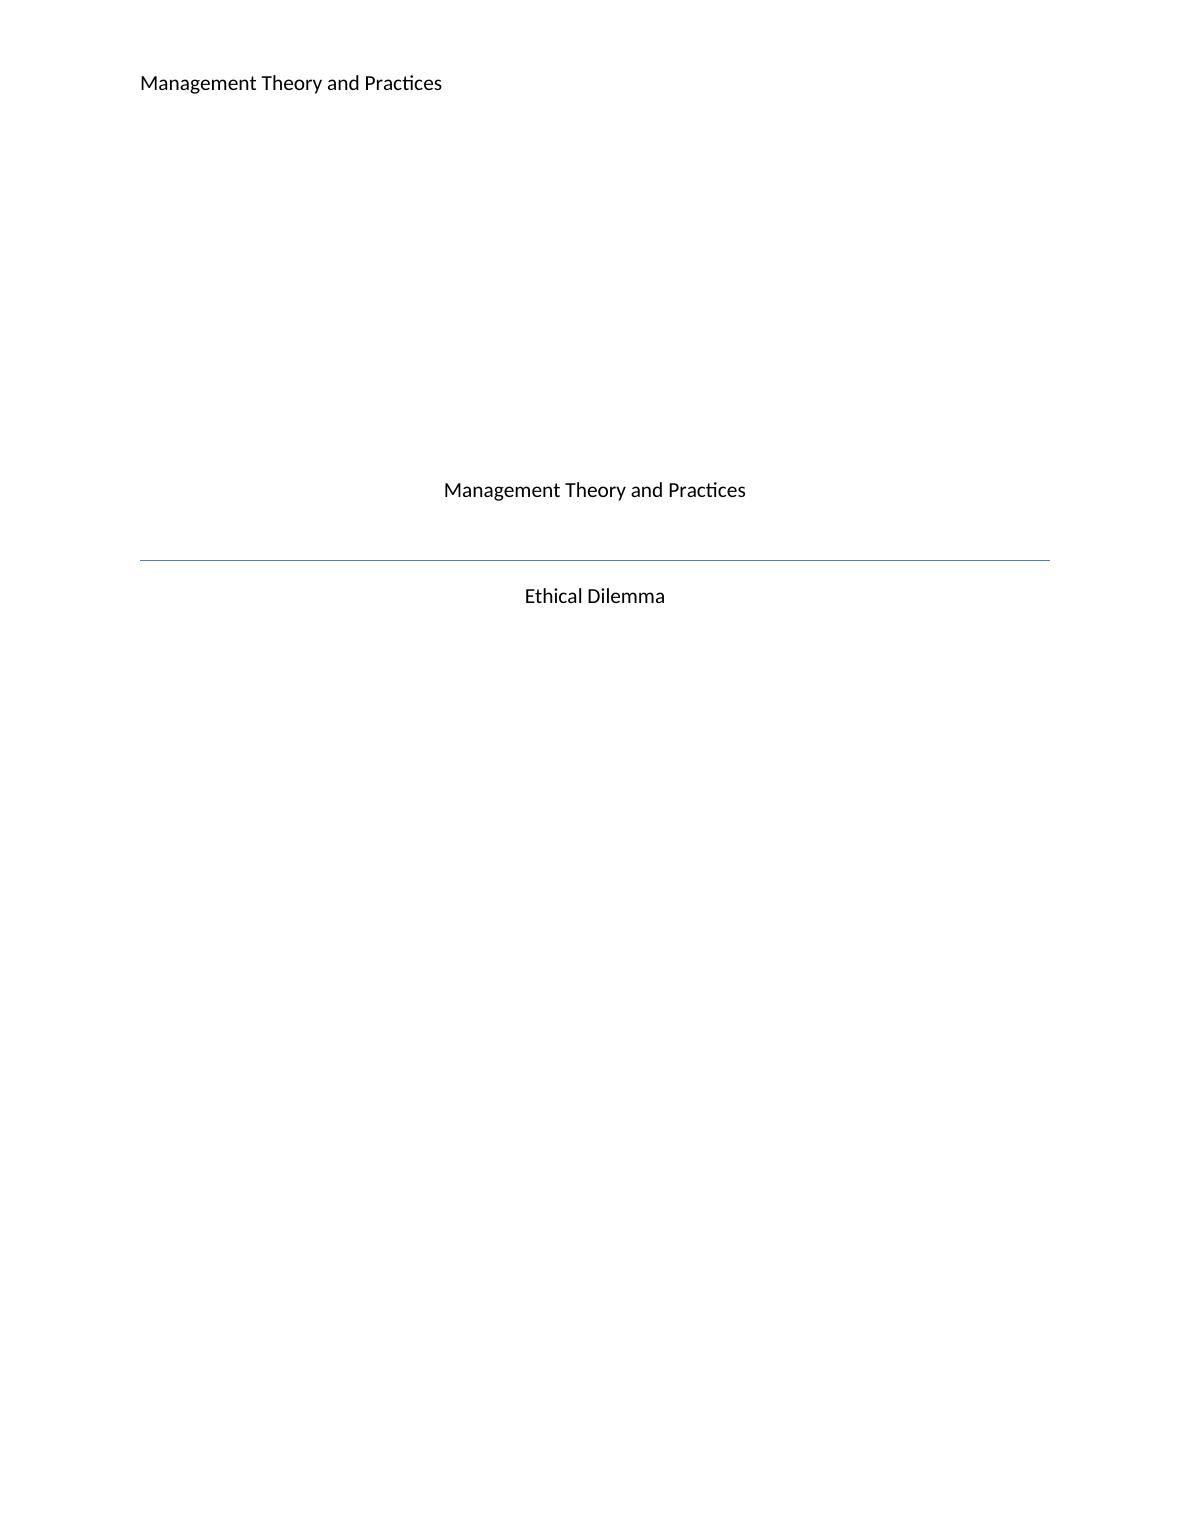 Management Theory and Practices - Report_1